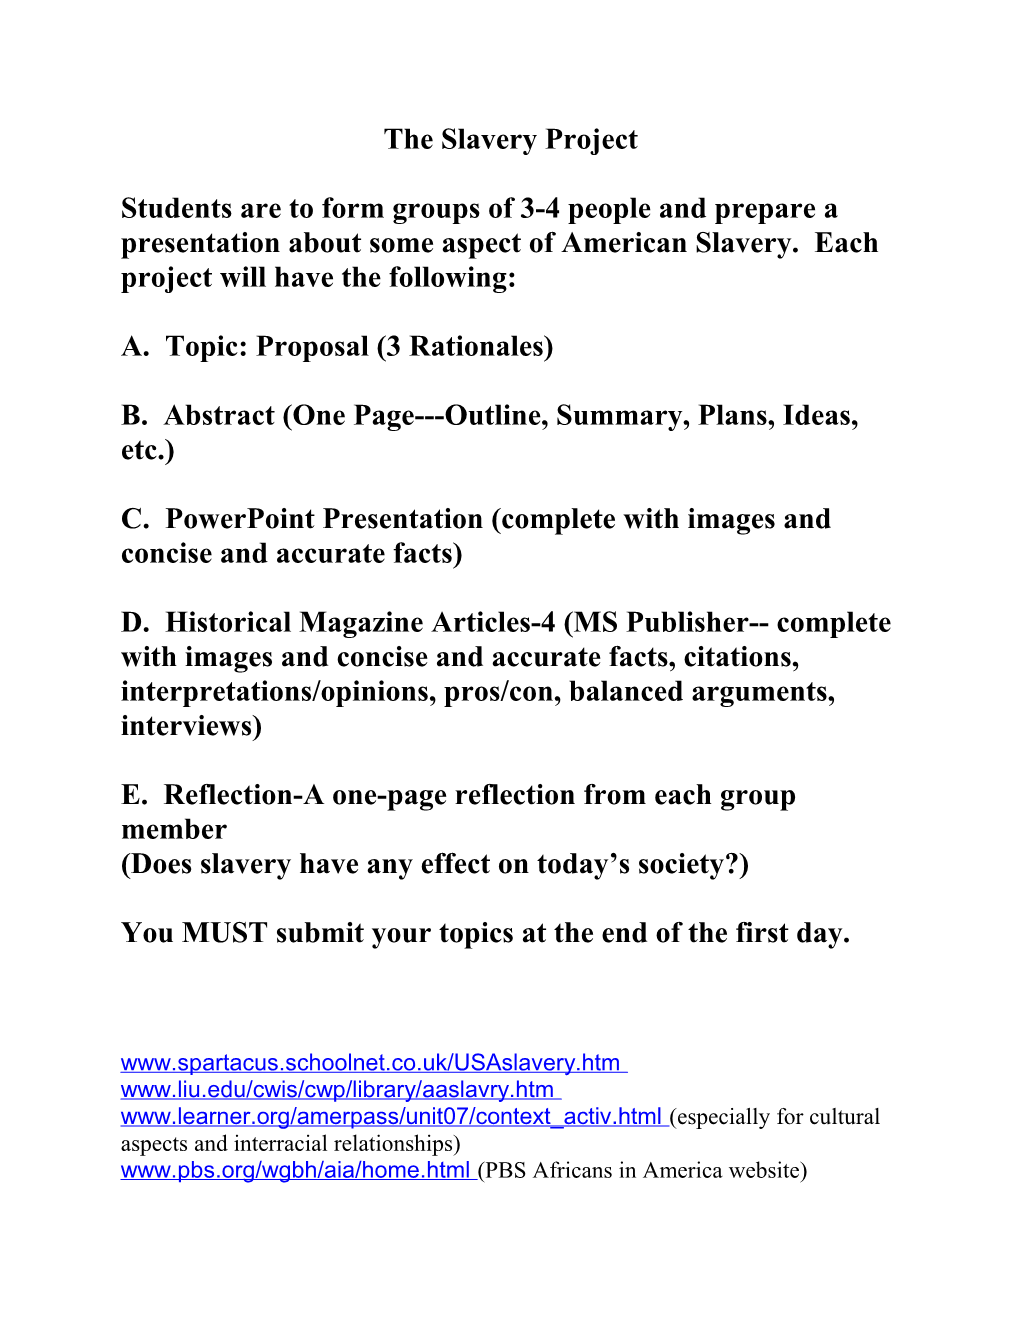 B. Abstract (One Page Outline, Summary, Plans, Ideas, Etc.)